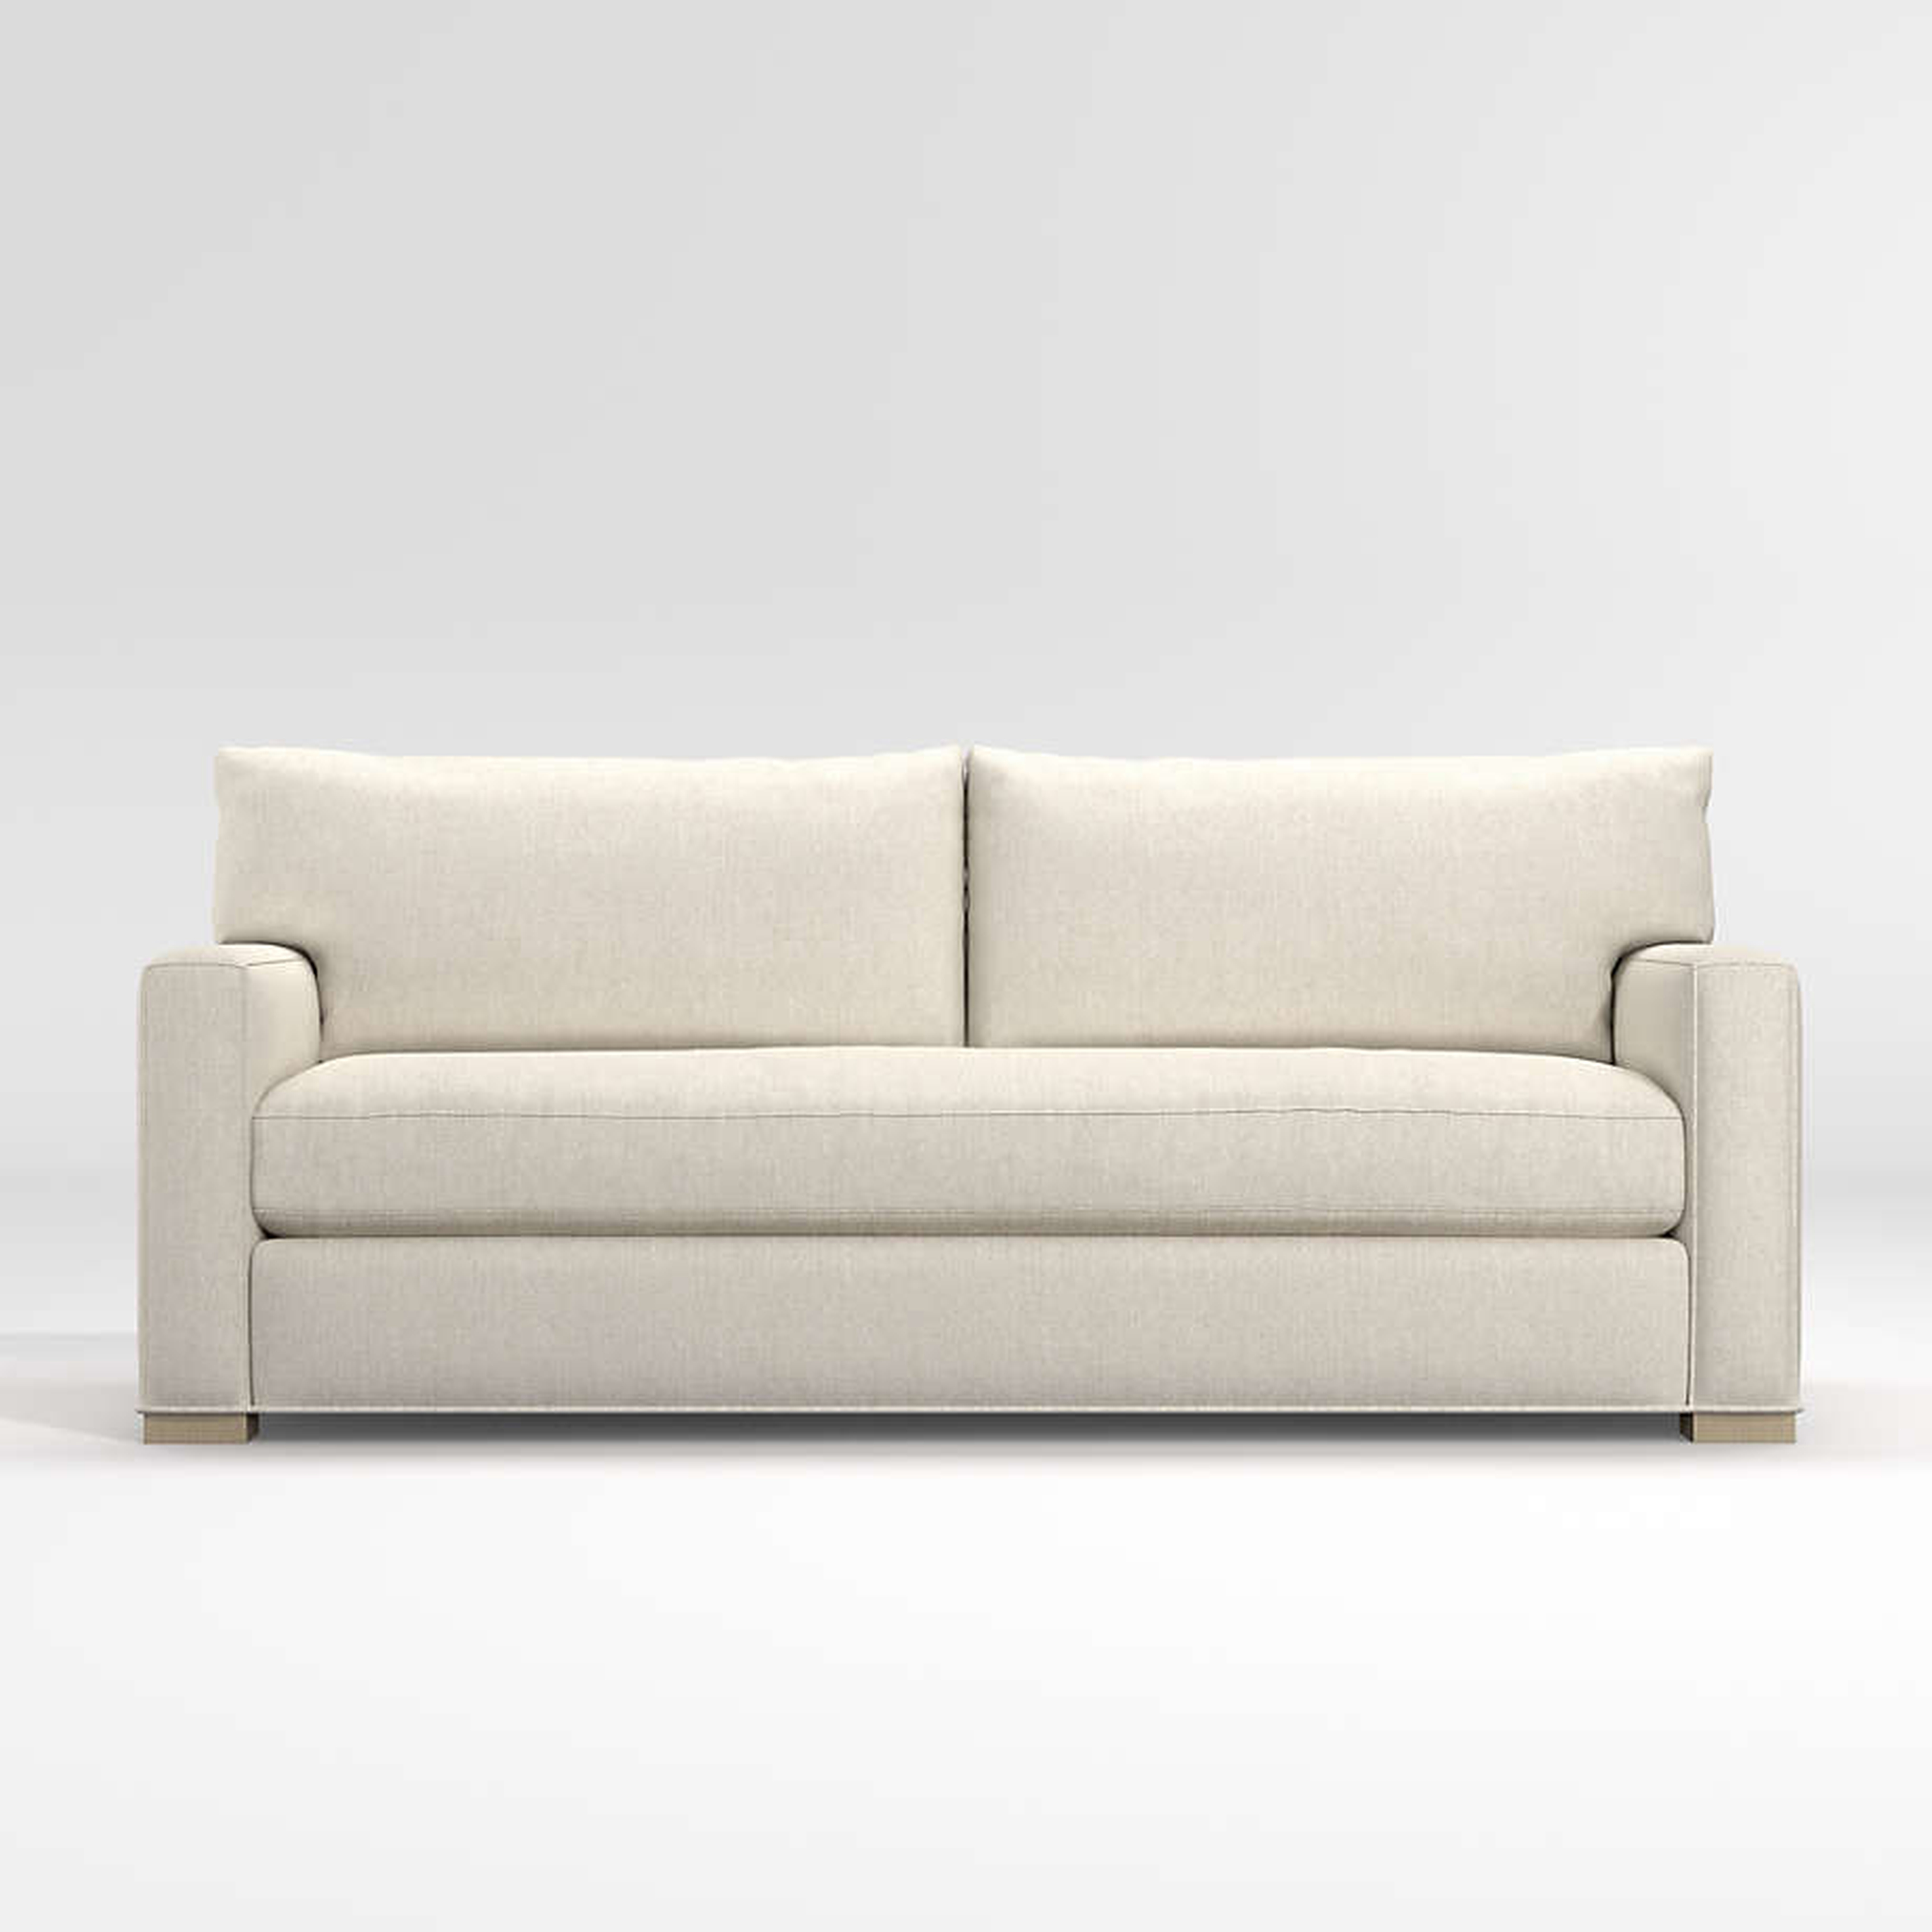 Axis Bench Sofa - Crate and Barrel